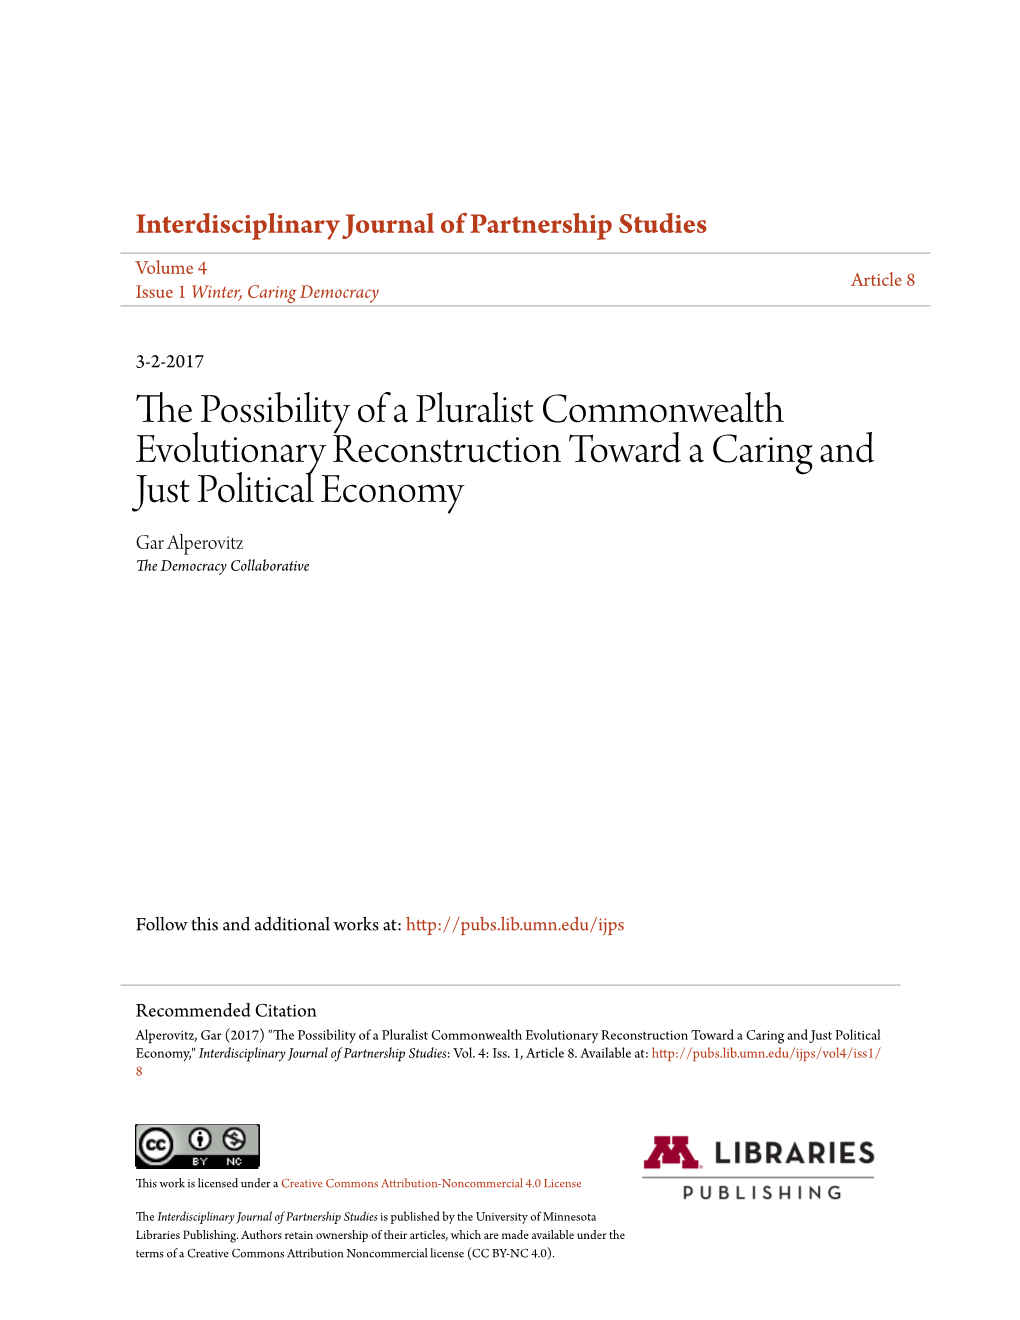 The Possibility of a Pluralist Commonwealth Evolutionary Reconstruction Toward a Caring and Just Political Economy Gar Alperovitz the Democracy Collaborative